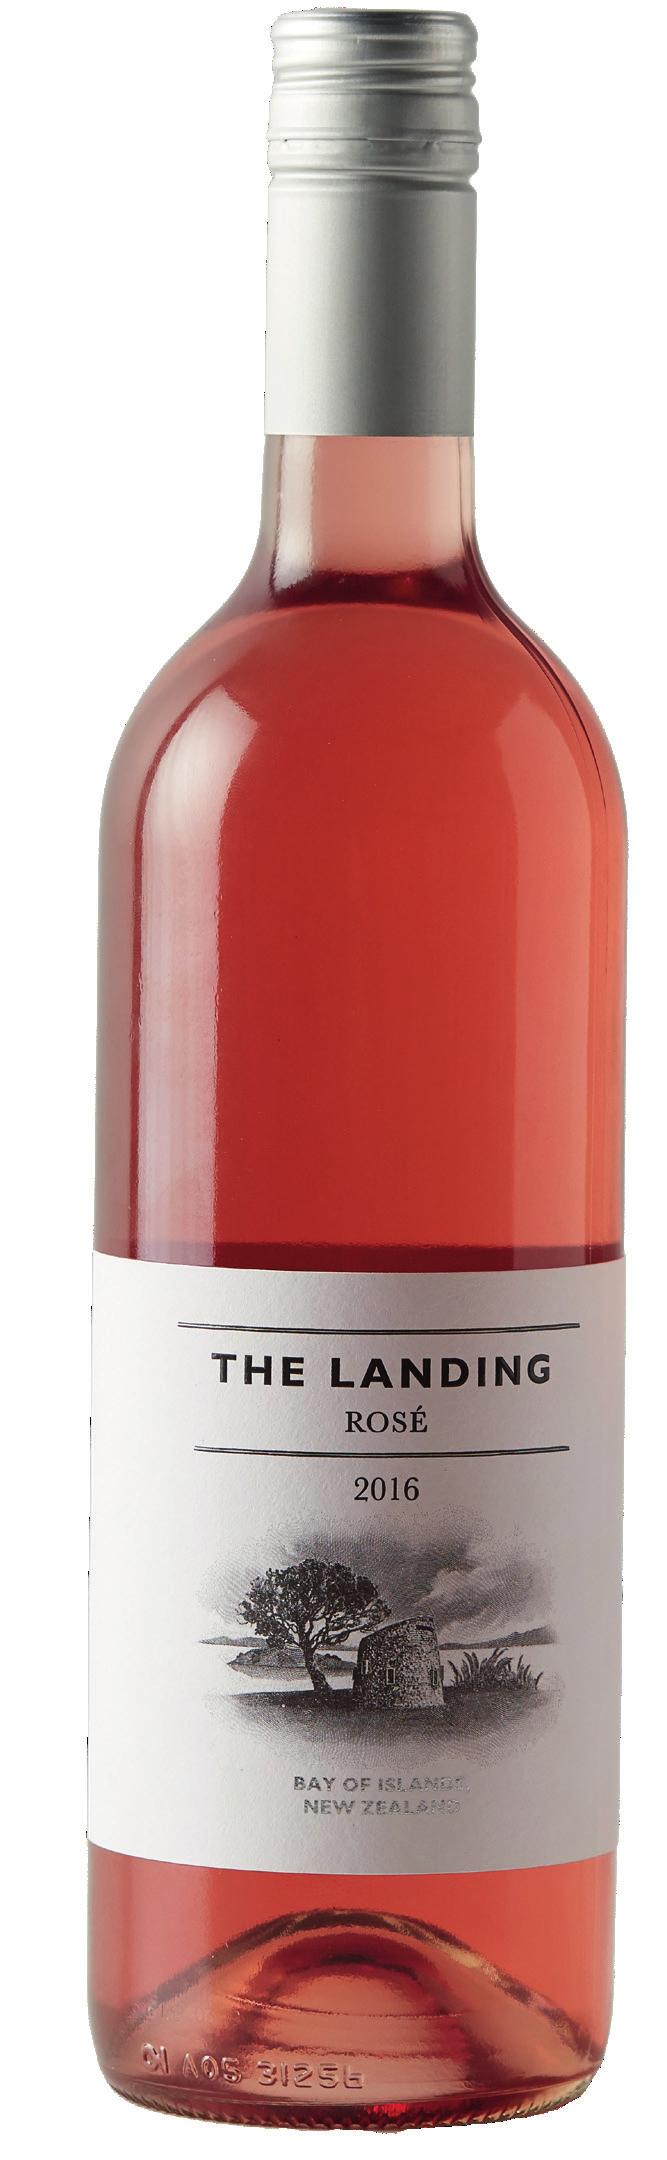 THE LANDING ROSE 2016 Grown on the coastal slopes overlooking the Bay of Islands, the 2016 Rose is an expression of fresh peach and fruit sweetness are balanced by a crisp, refreshing finish.